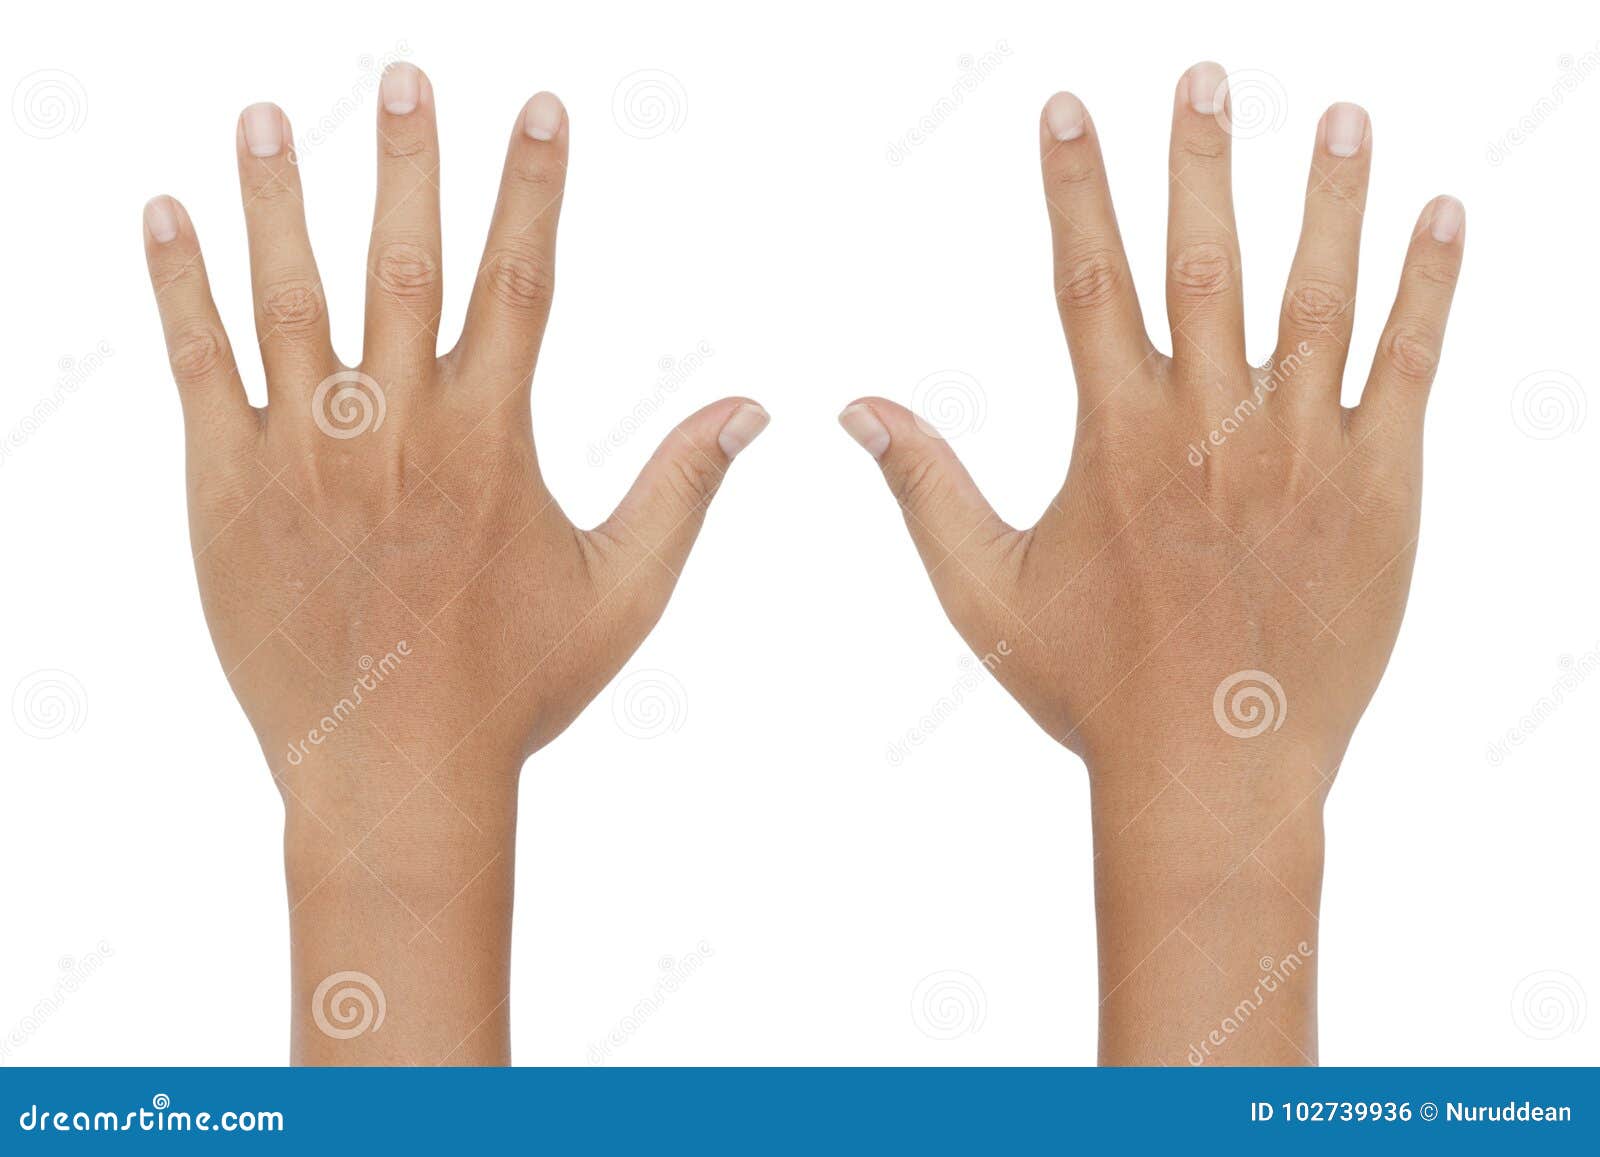 hand showing the ten fingers on white background